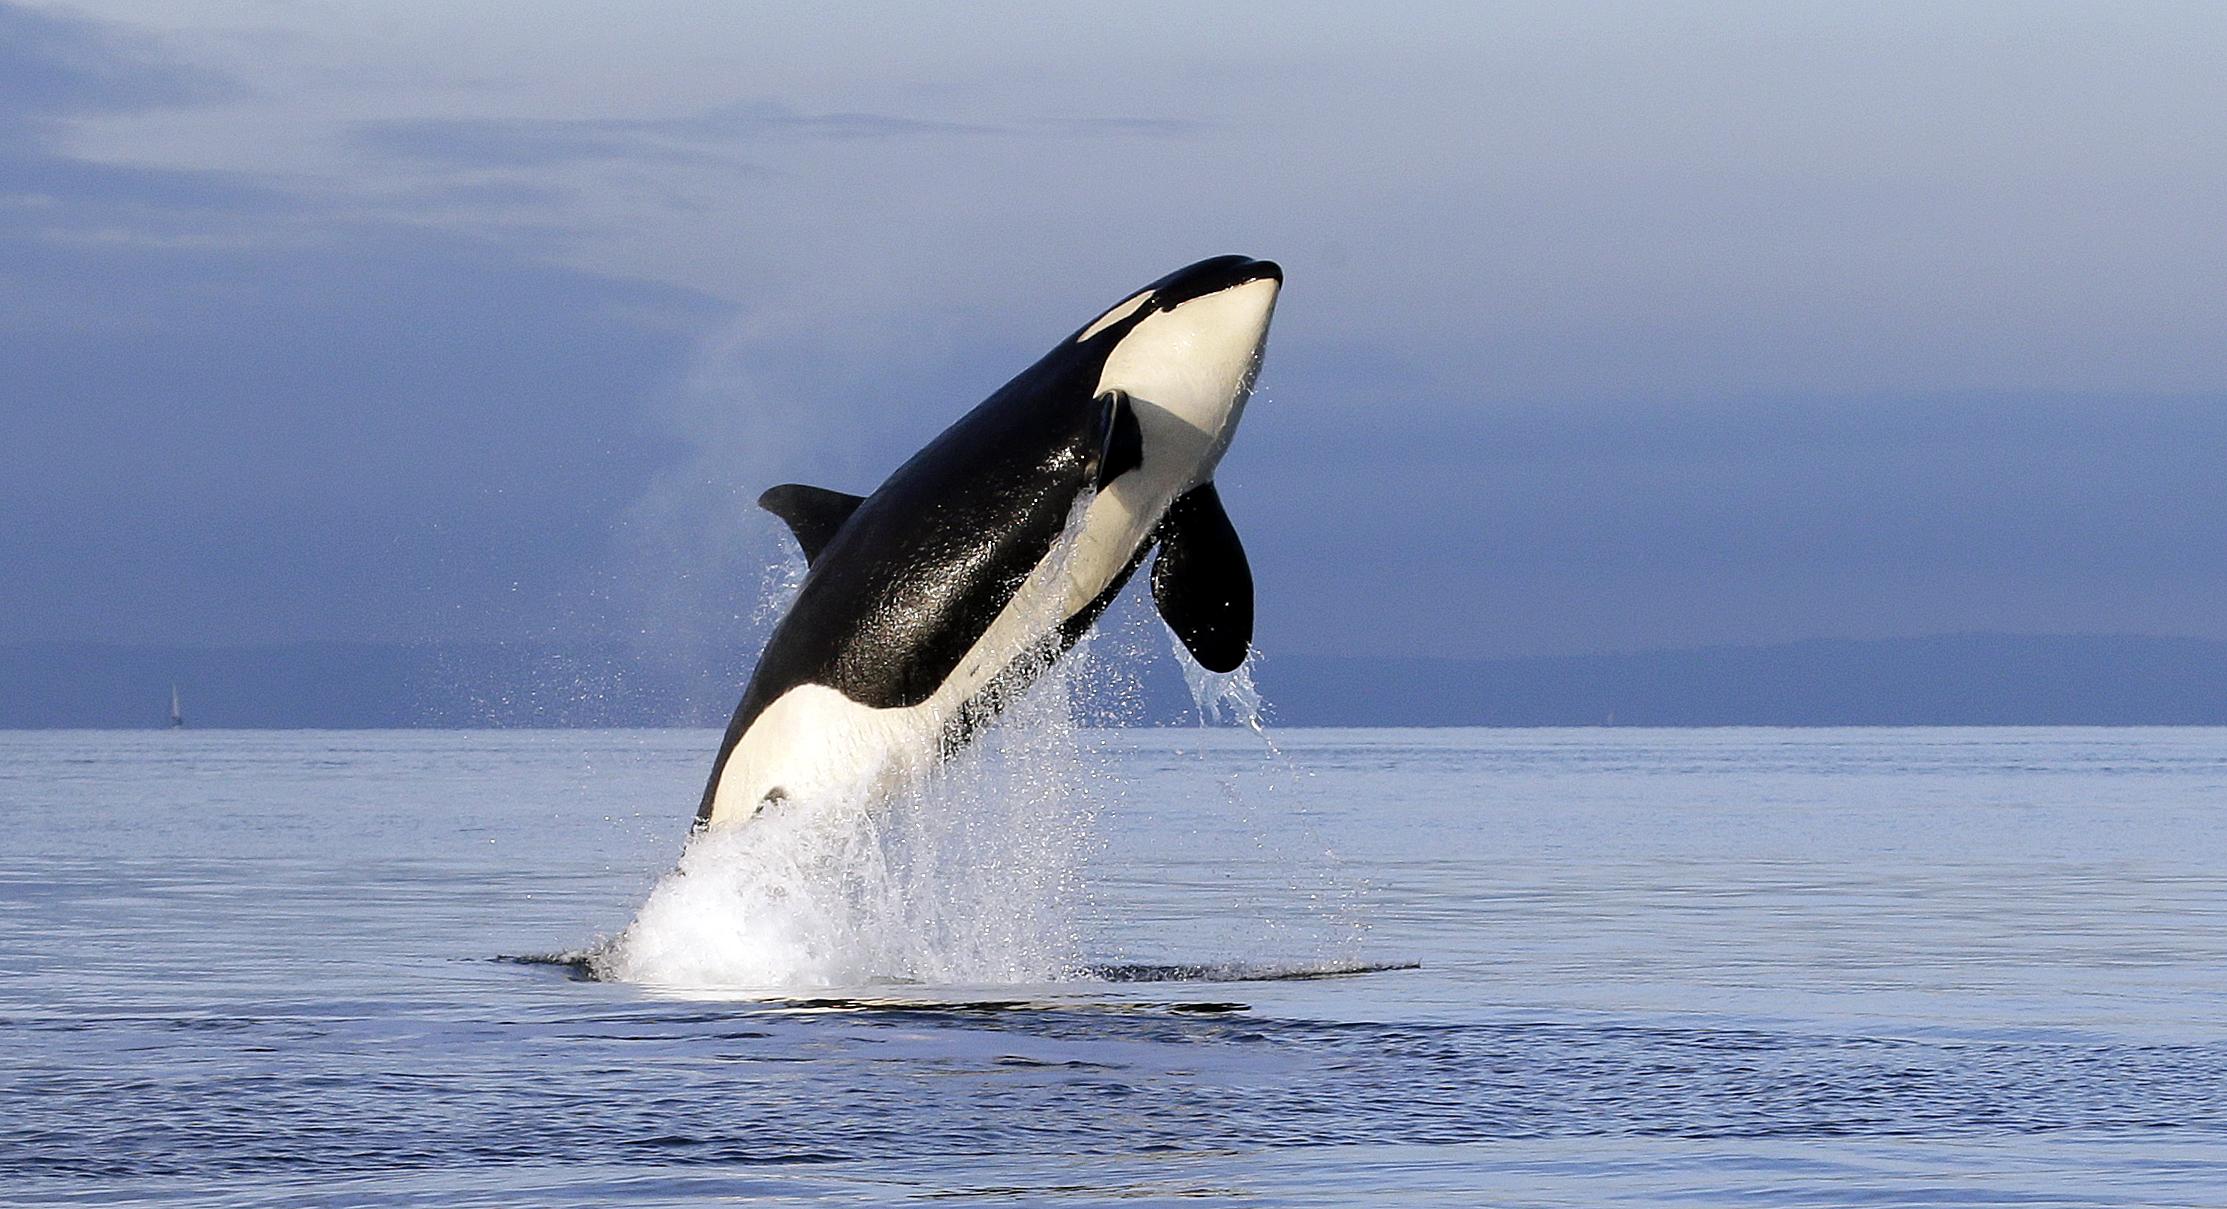 Pranks or predation? Exploring the reasons behind Orcas' interactions with boats. (Photo Internet reproduction)